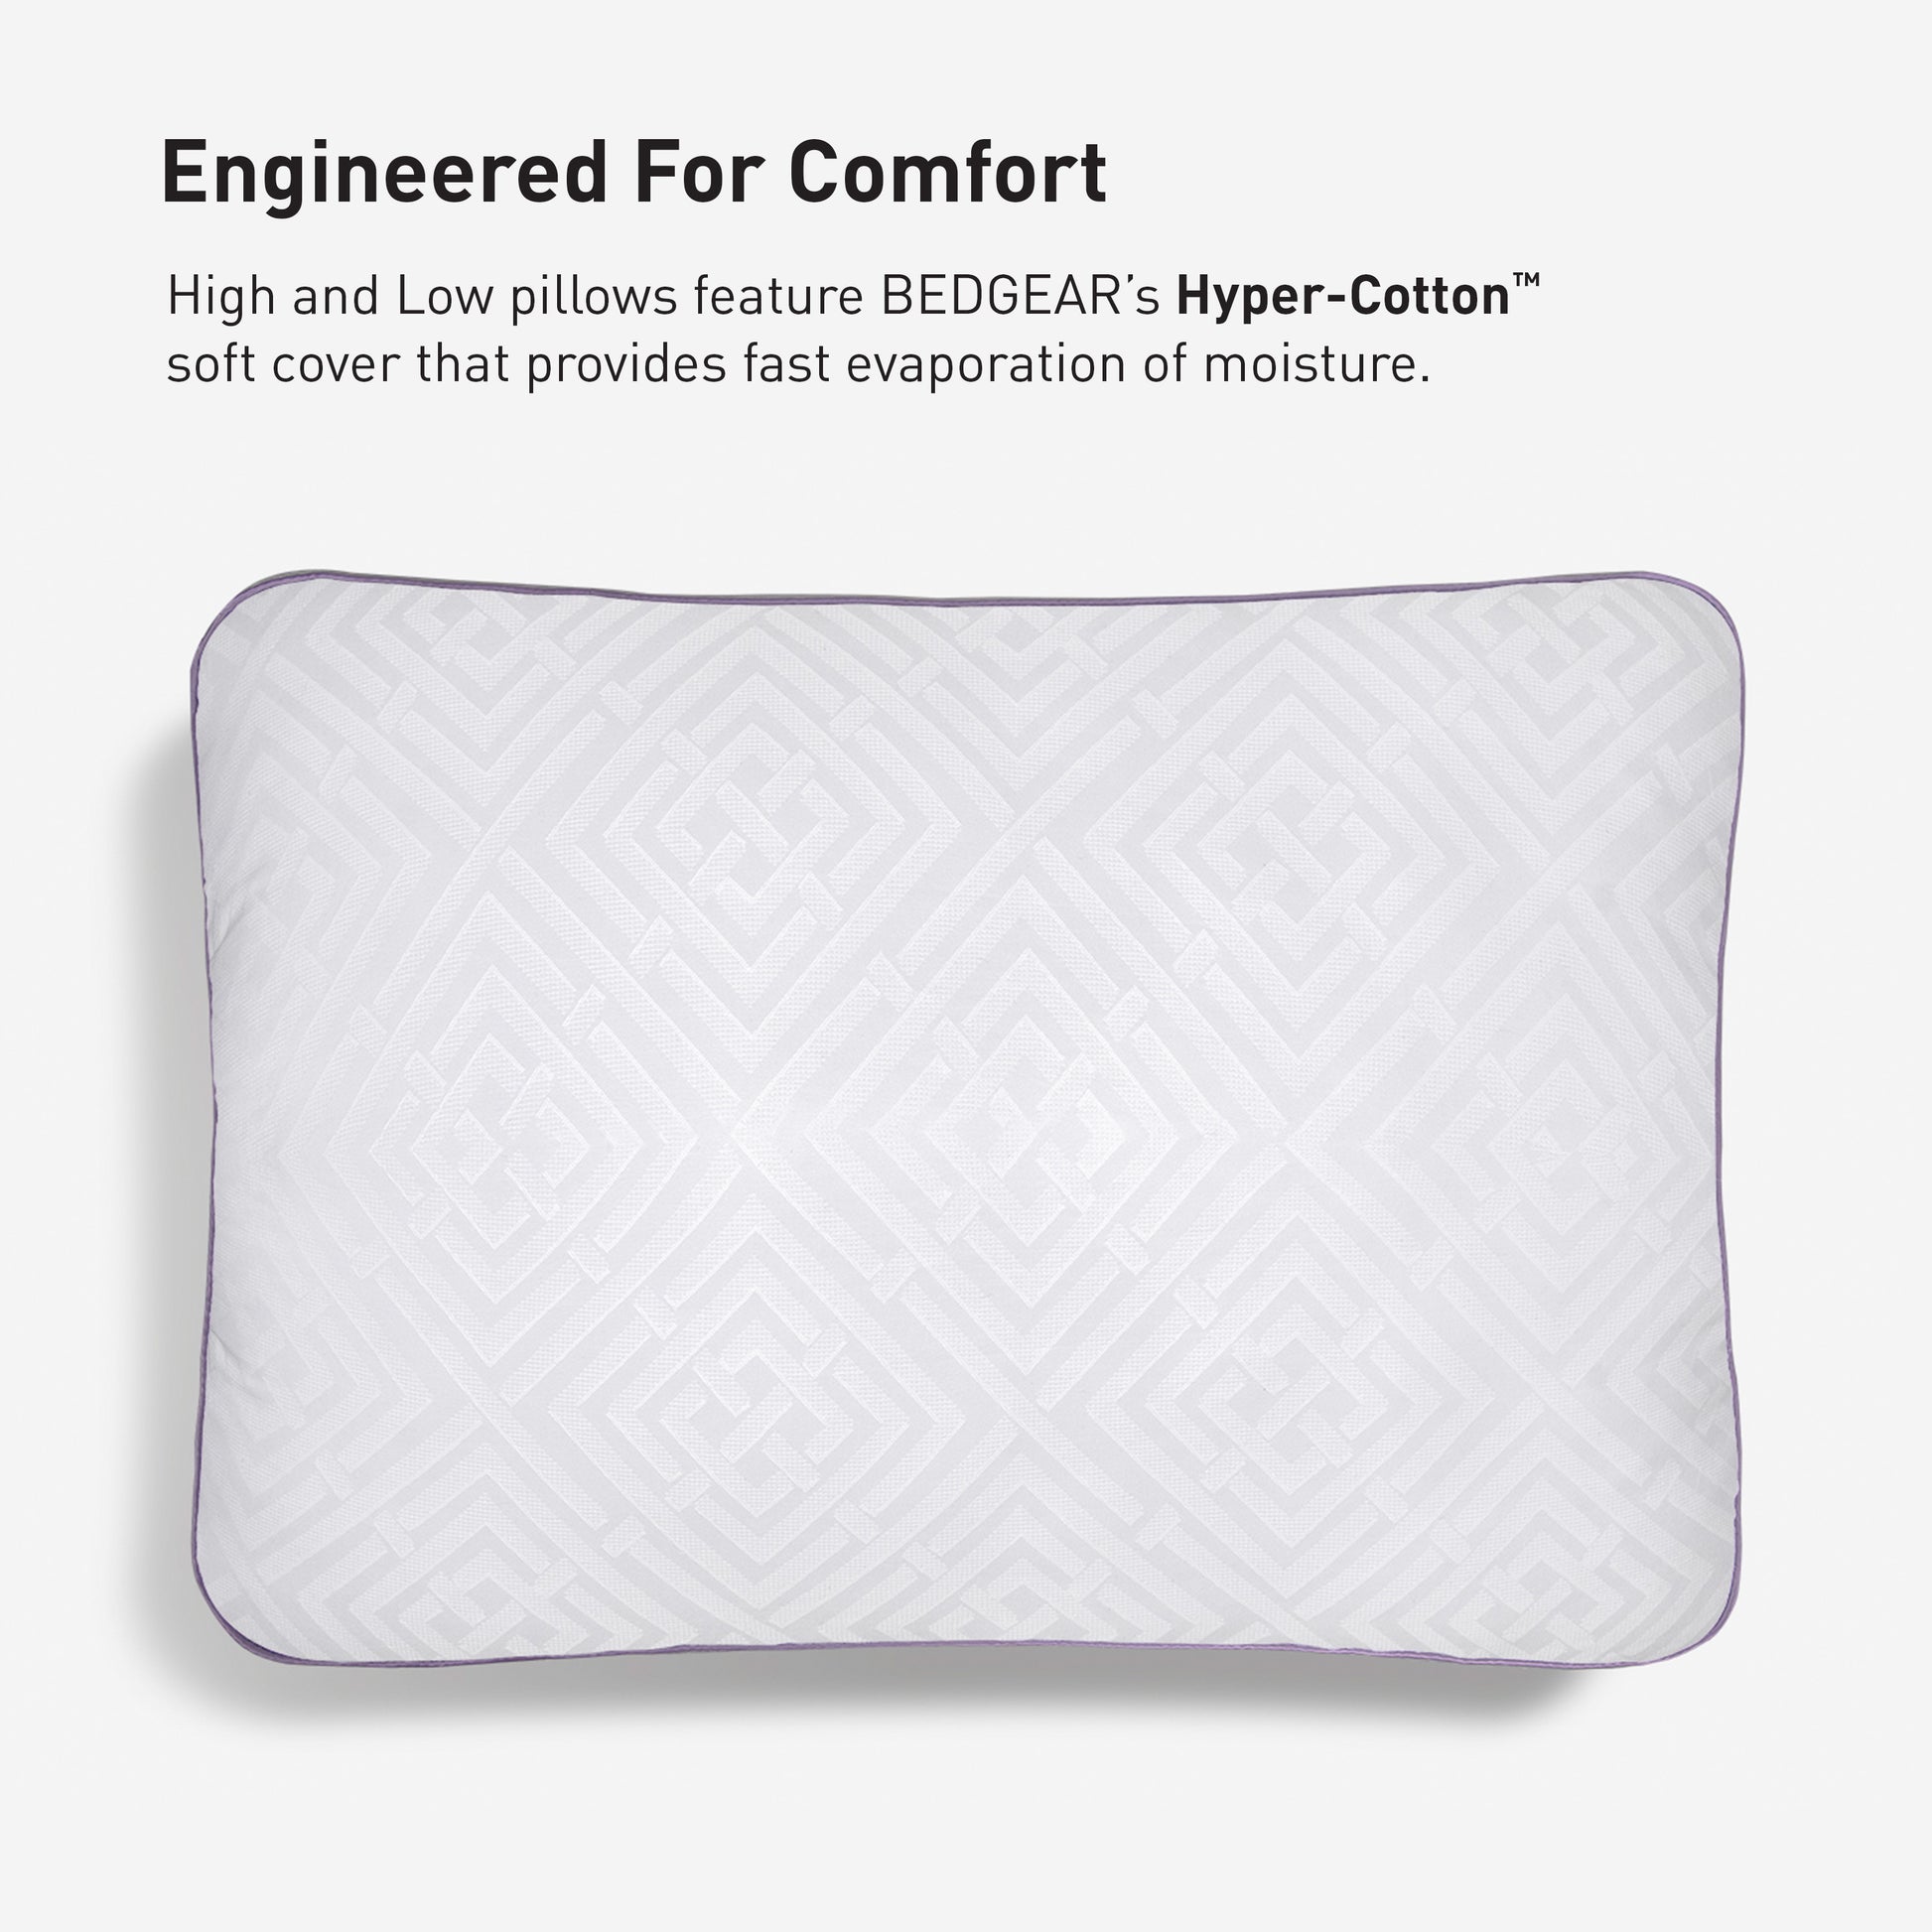 Bedgear High-Low Performance Pillow - Image 8